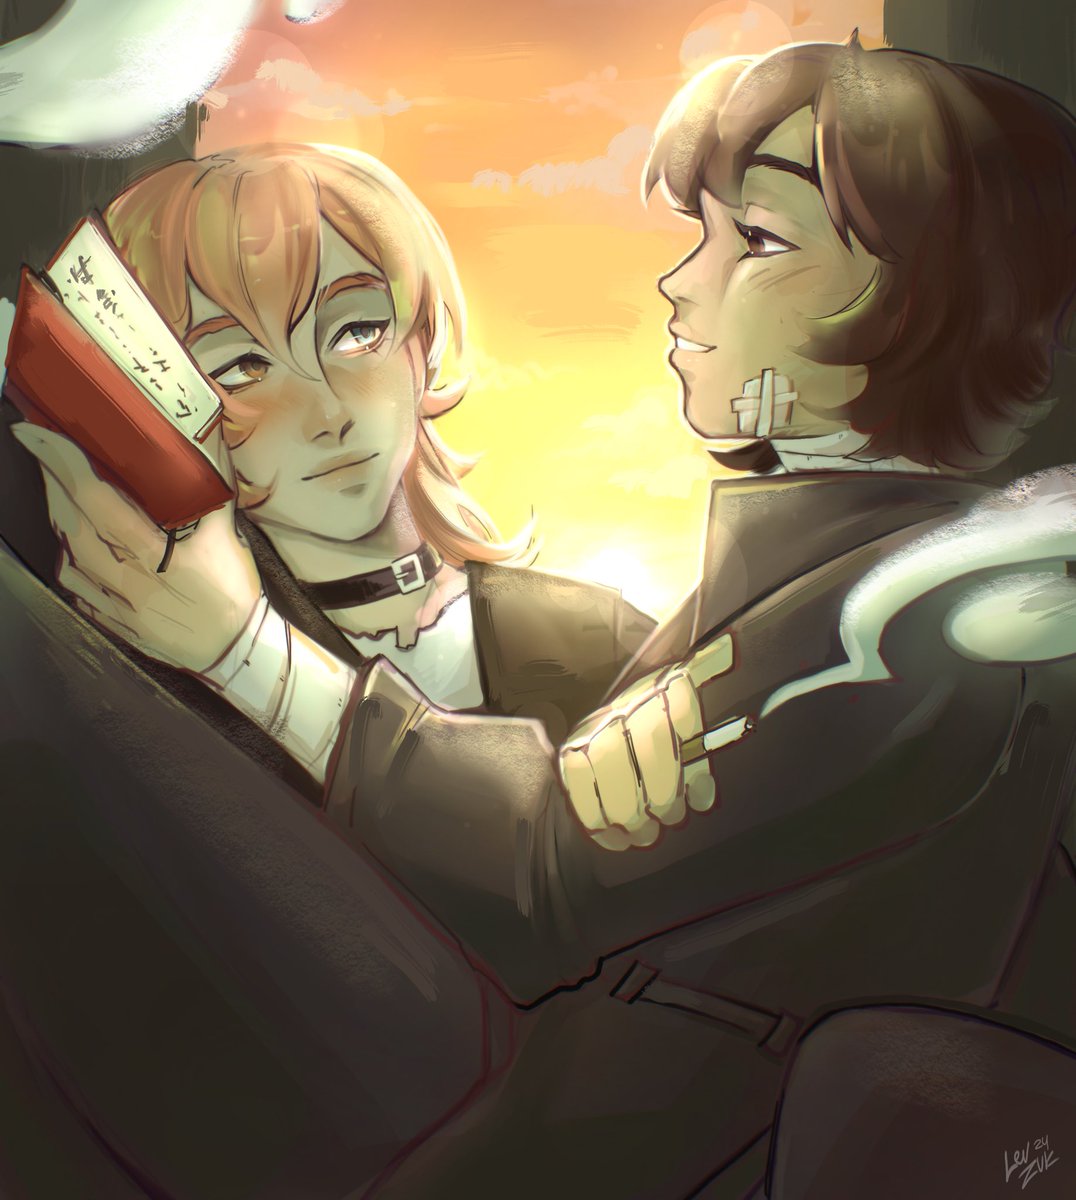 you're just kids who crawled into an abandoned building, he reads you his stupid books, and all is well, but after a couple minutes you realize you're in love with Dazai Osamu (this is going to be a disaster) #bsd #skk #soukoku #украрт #укрбсд